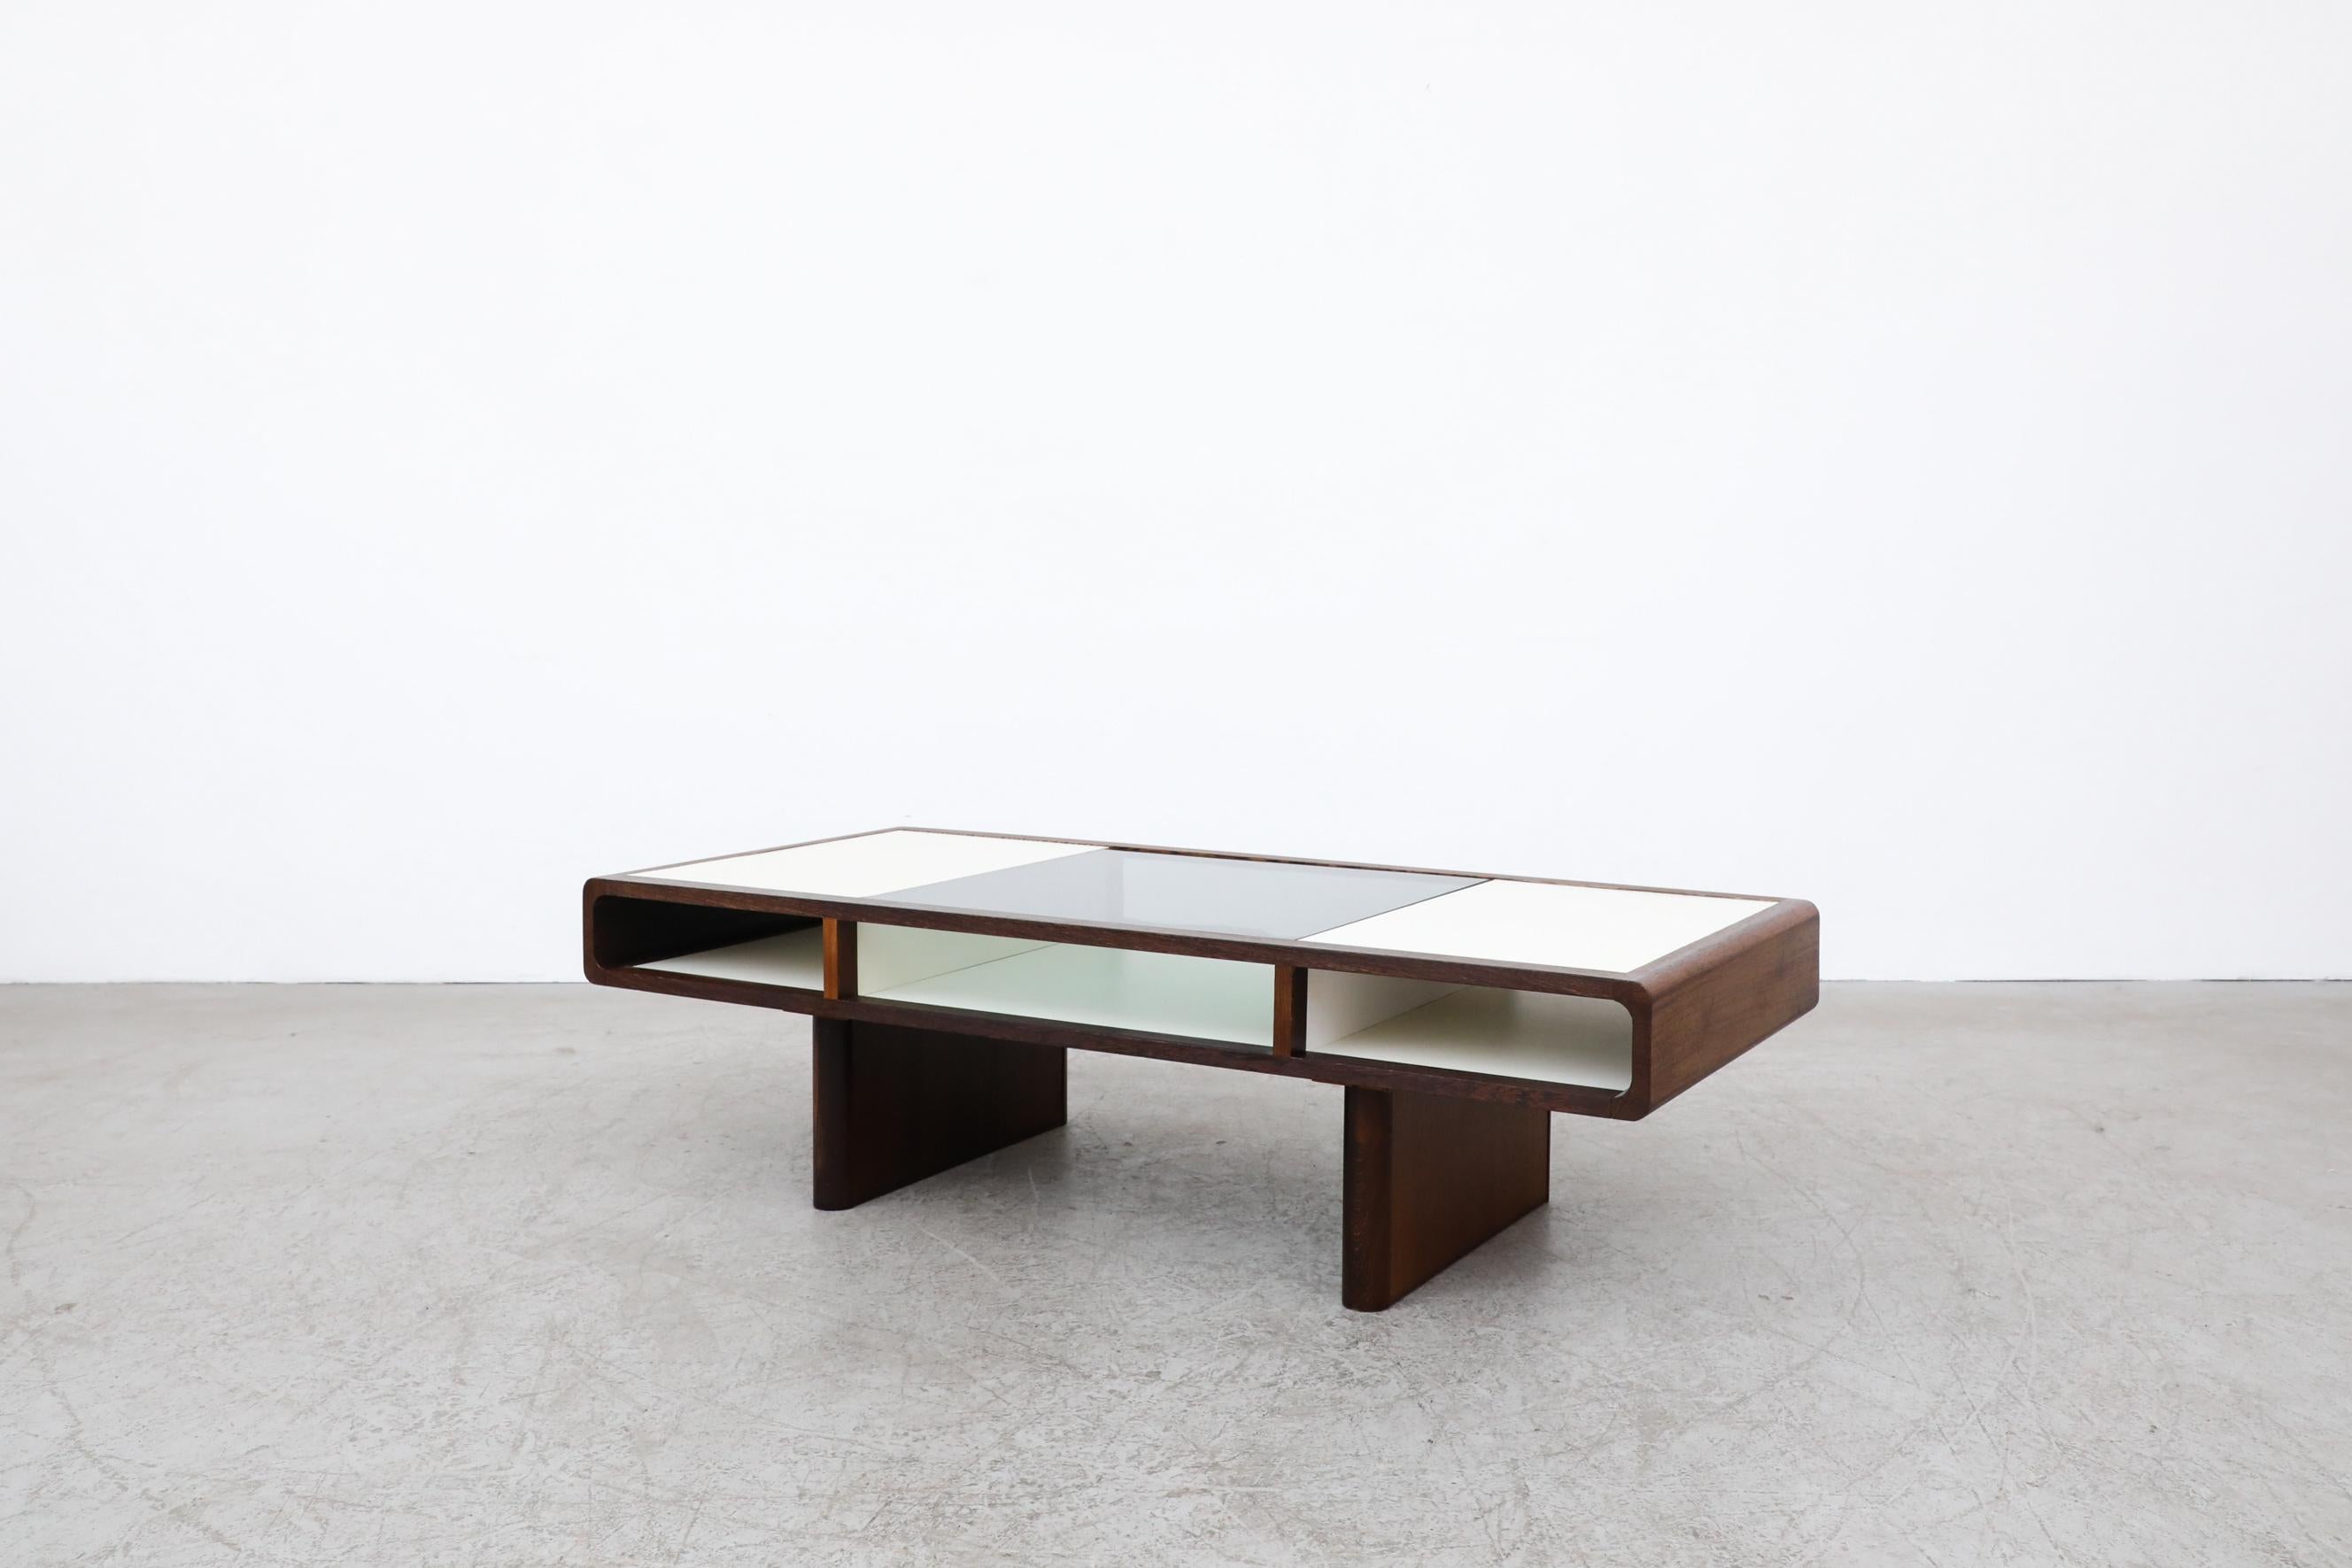 This Jean Maneval style wenge and white coffee table features three storage compartments, ideal for magazines and books. The center of the table is smoked glass. It is in original condition with a few minor scratches and no structural damage. The